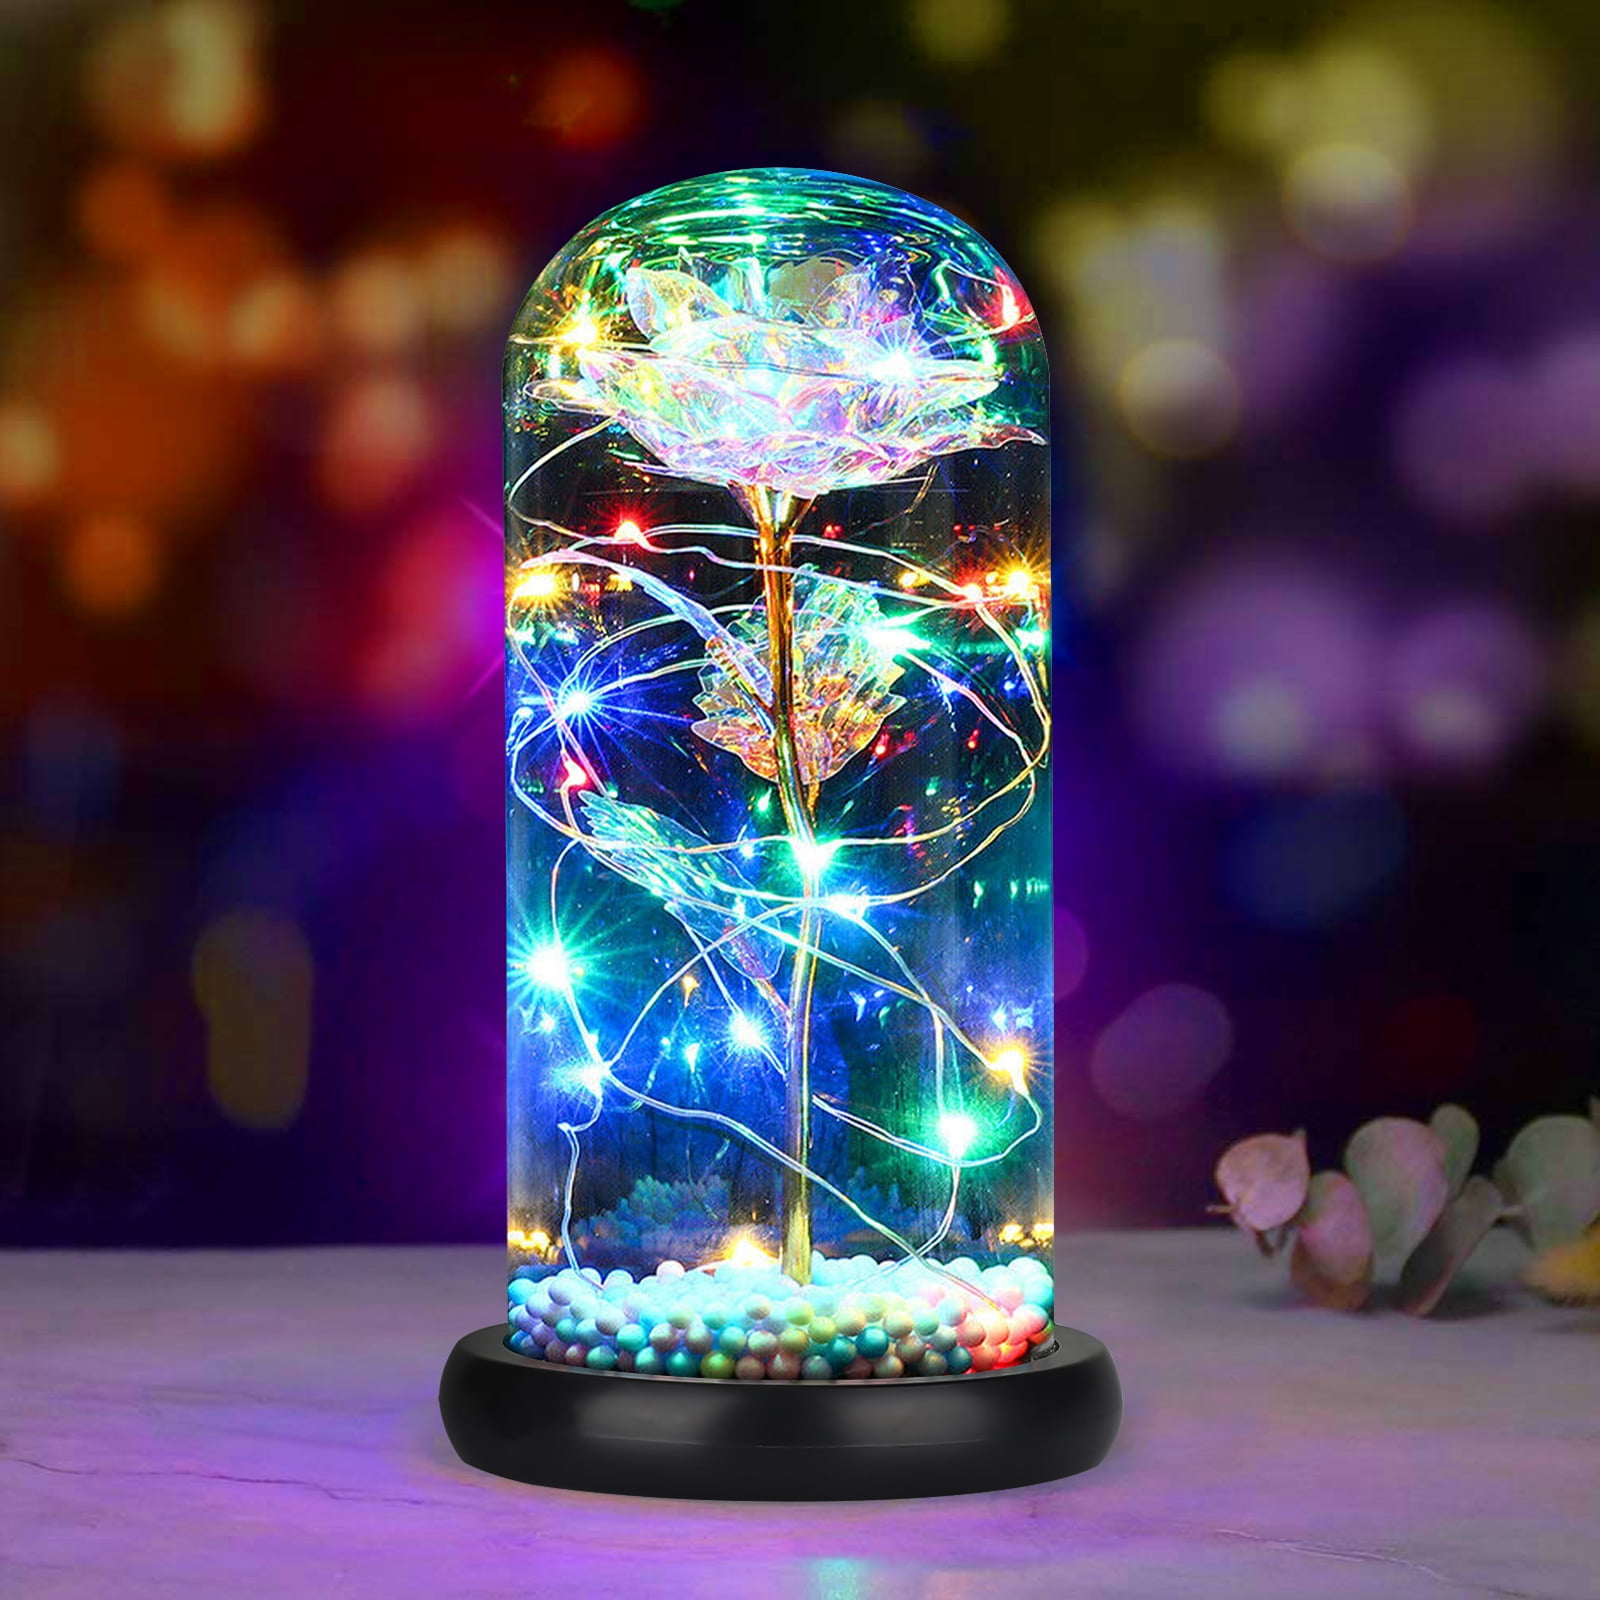 Unique Gift for Her Galaxy Rose Flower in Glass Dome with Led Light String on The Rose Gift for Best Friend Wife Girlfriend Birthday Graduation Anniversary Thanksgiving Gifts Purple Enchantress